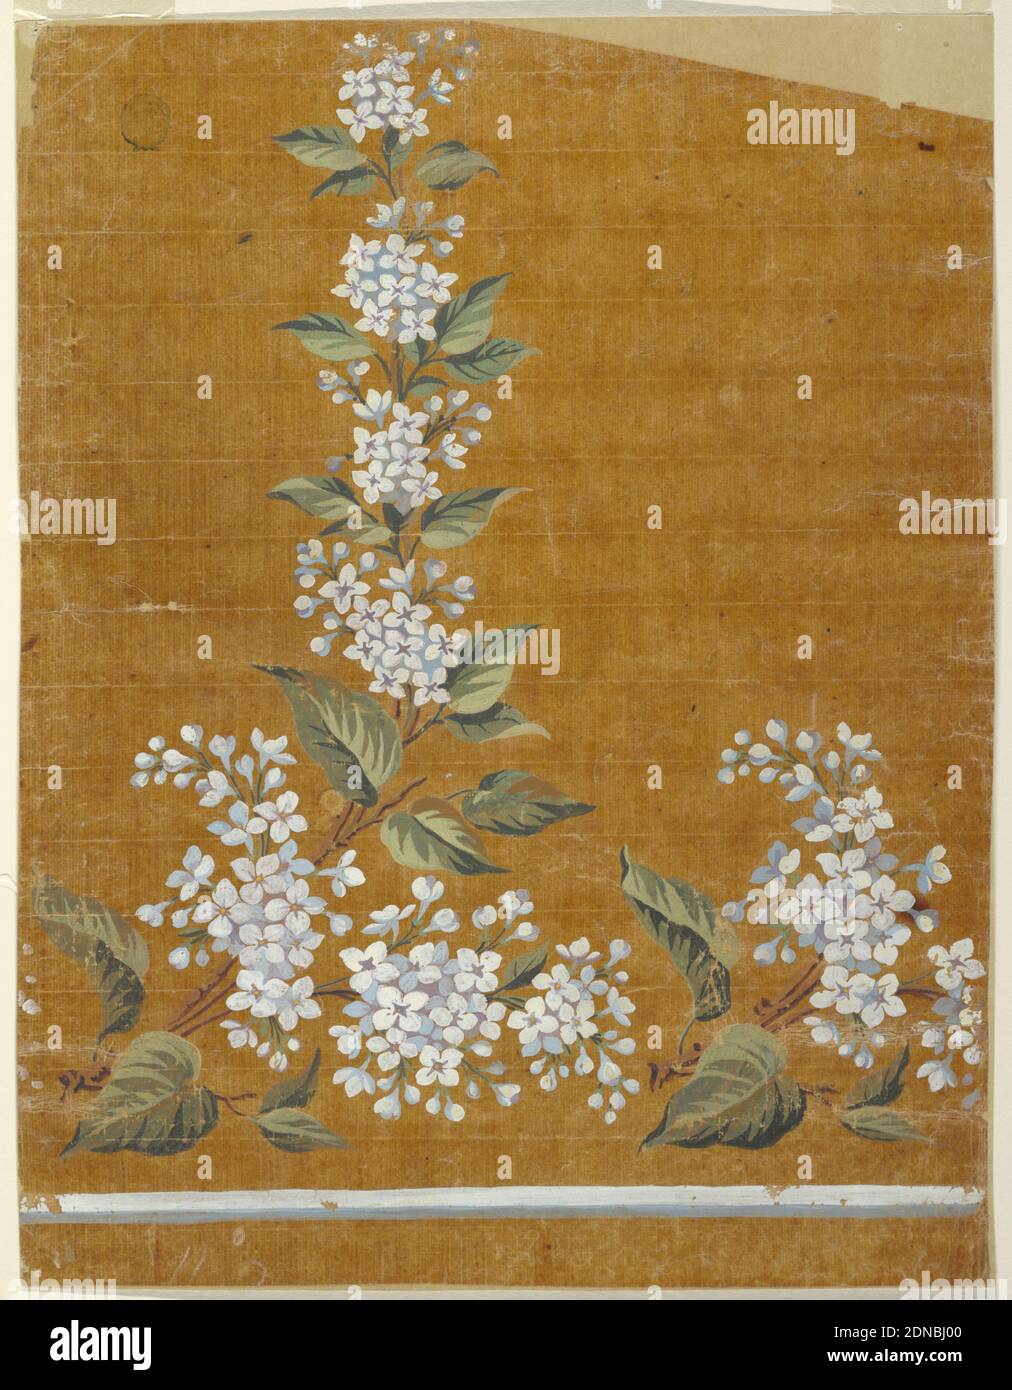 Design for the Border Motif of a Woven Fabric of the 'Fabrique de St. Ruf', Fabrique de Saint Ruf, Lyon, France, Brush and gouache on oily tracing paper, Boughs with leaves and and bluish blossoms stand over a white and blue stripe. One bough and the lower part of a second one are shown., France, 1800–1825, Drawing Stock Photo